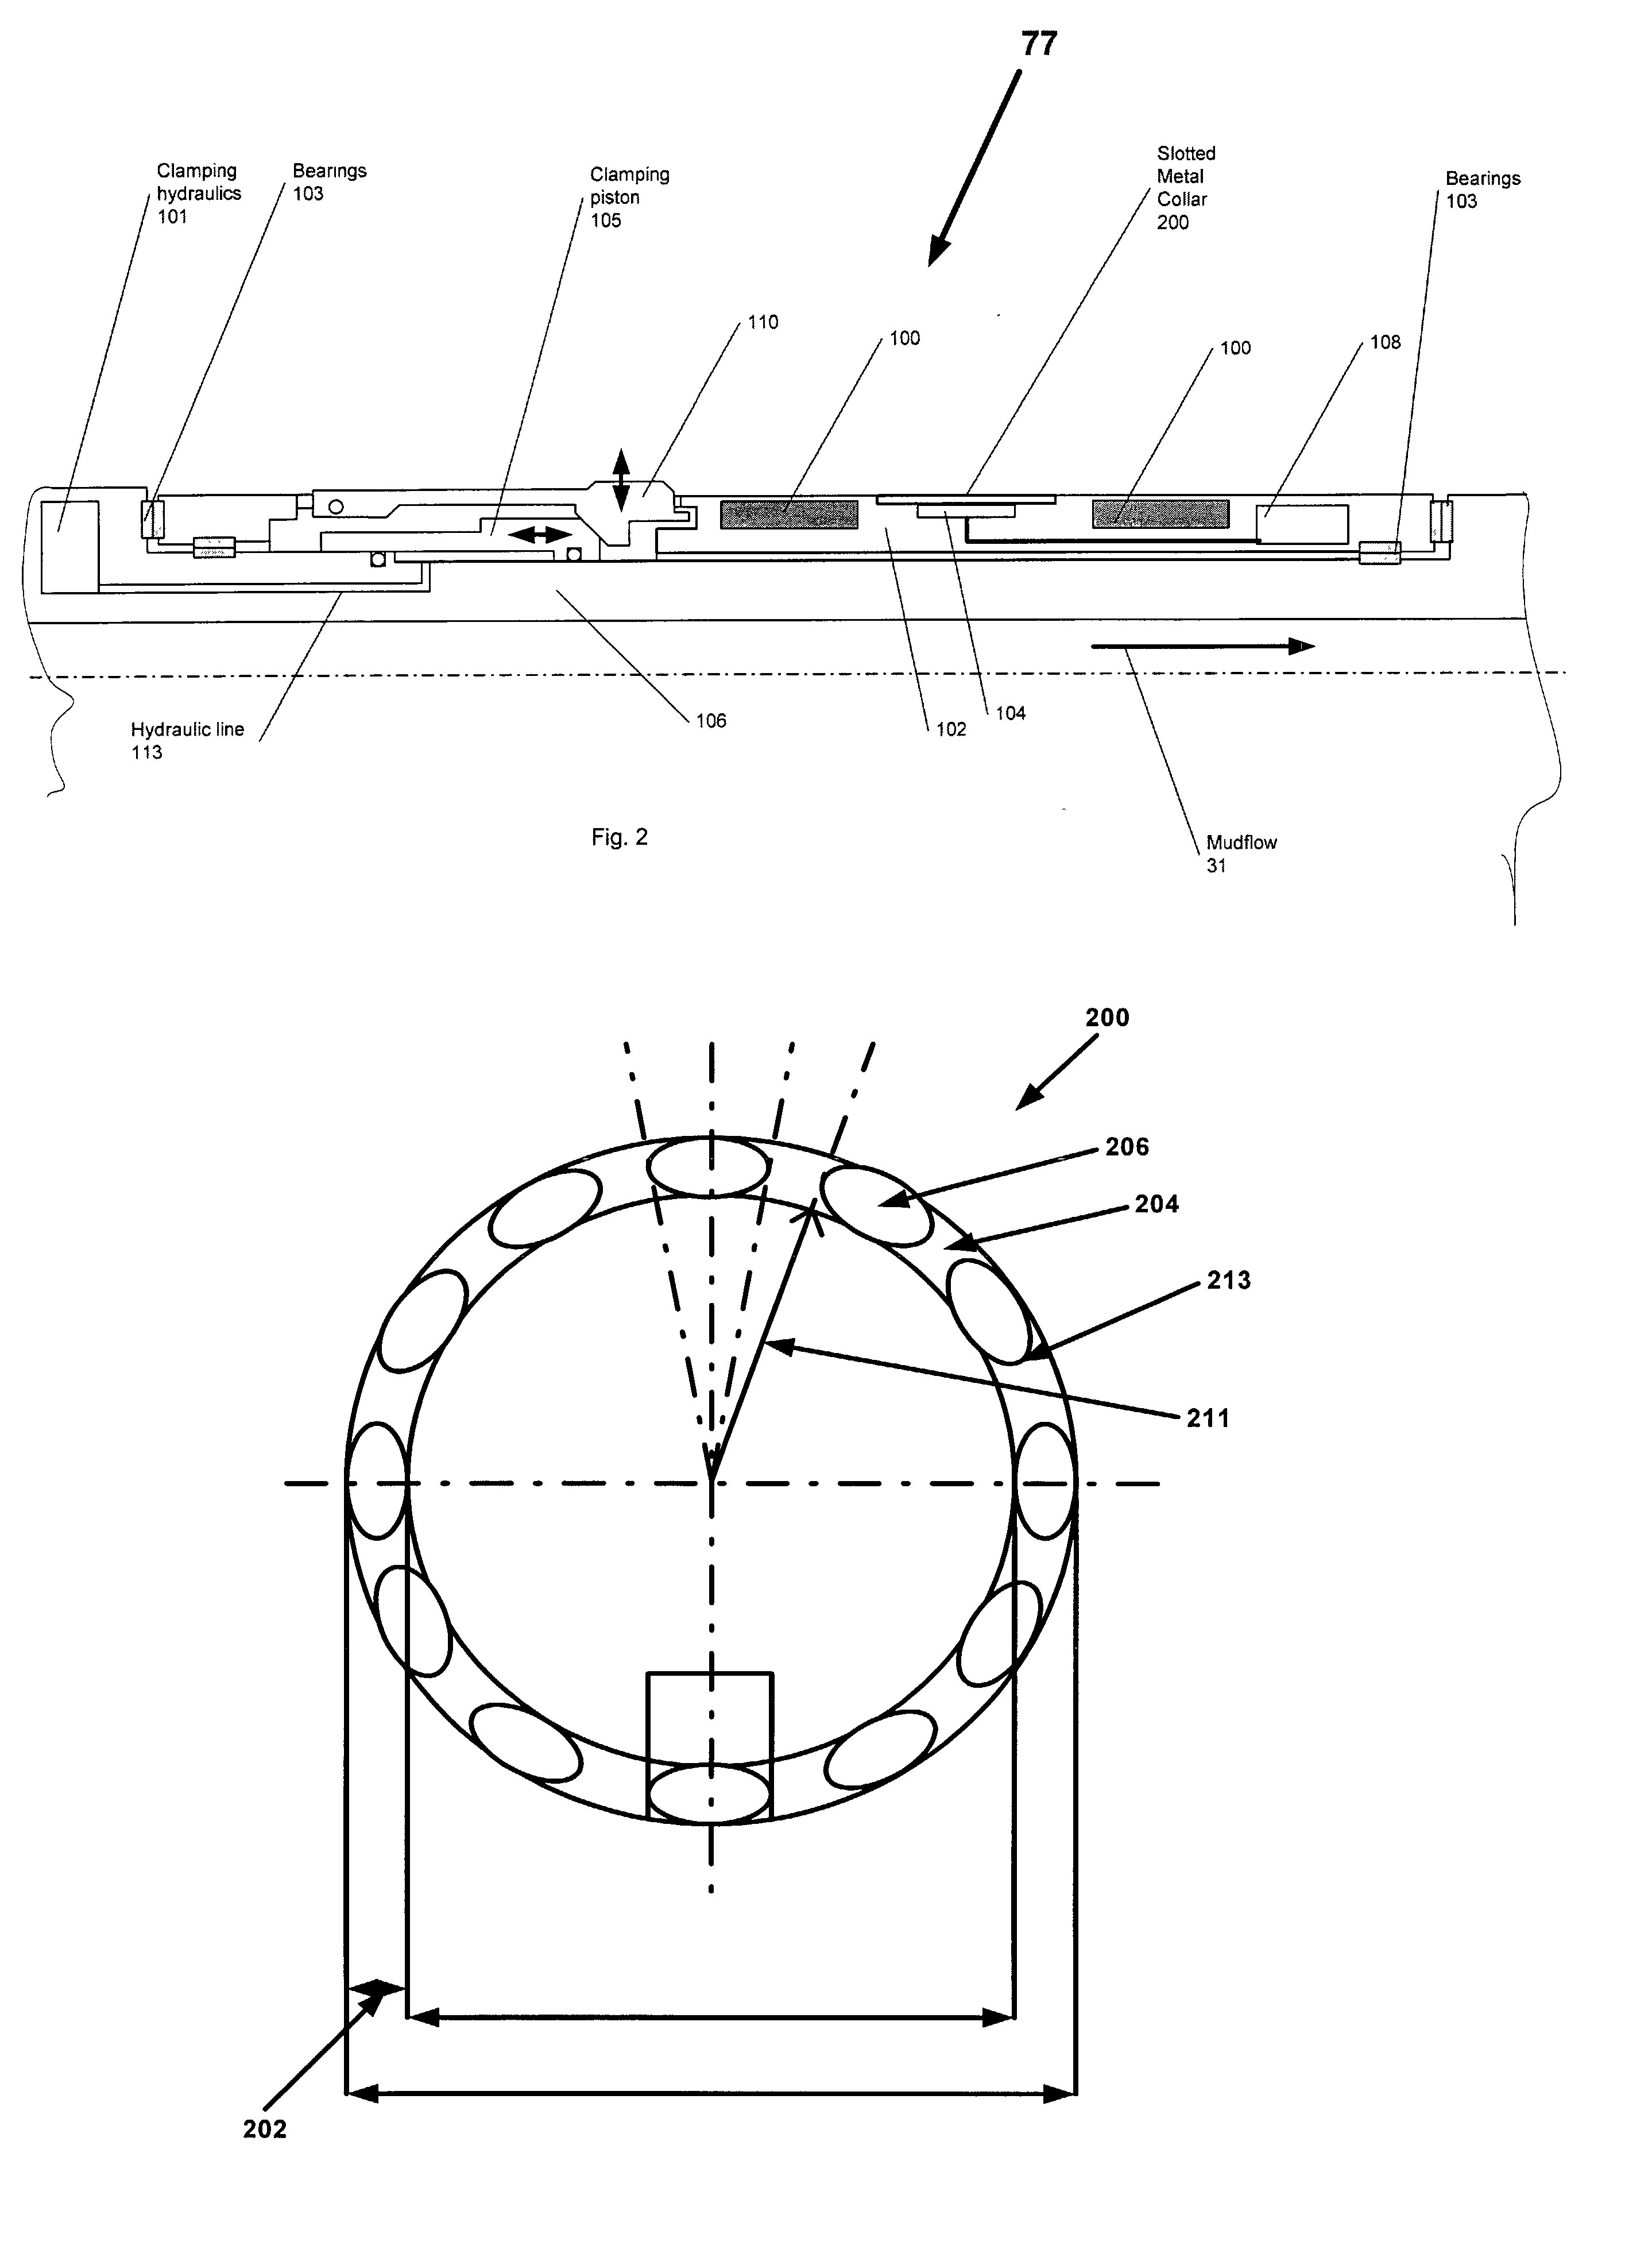 Method and apparatus for an NMR antenna with slotted metal cover